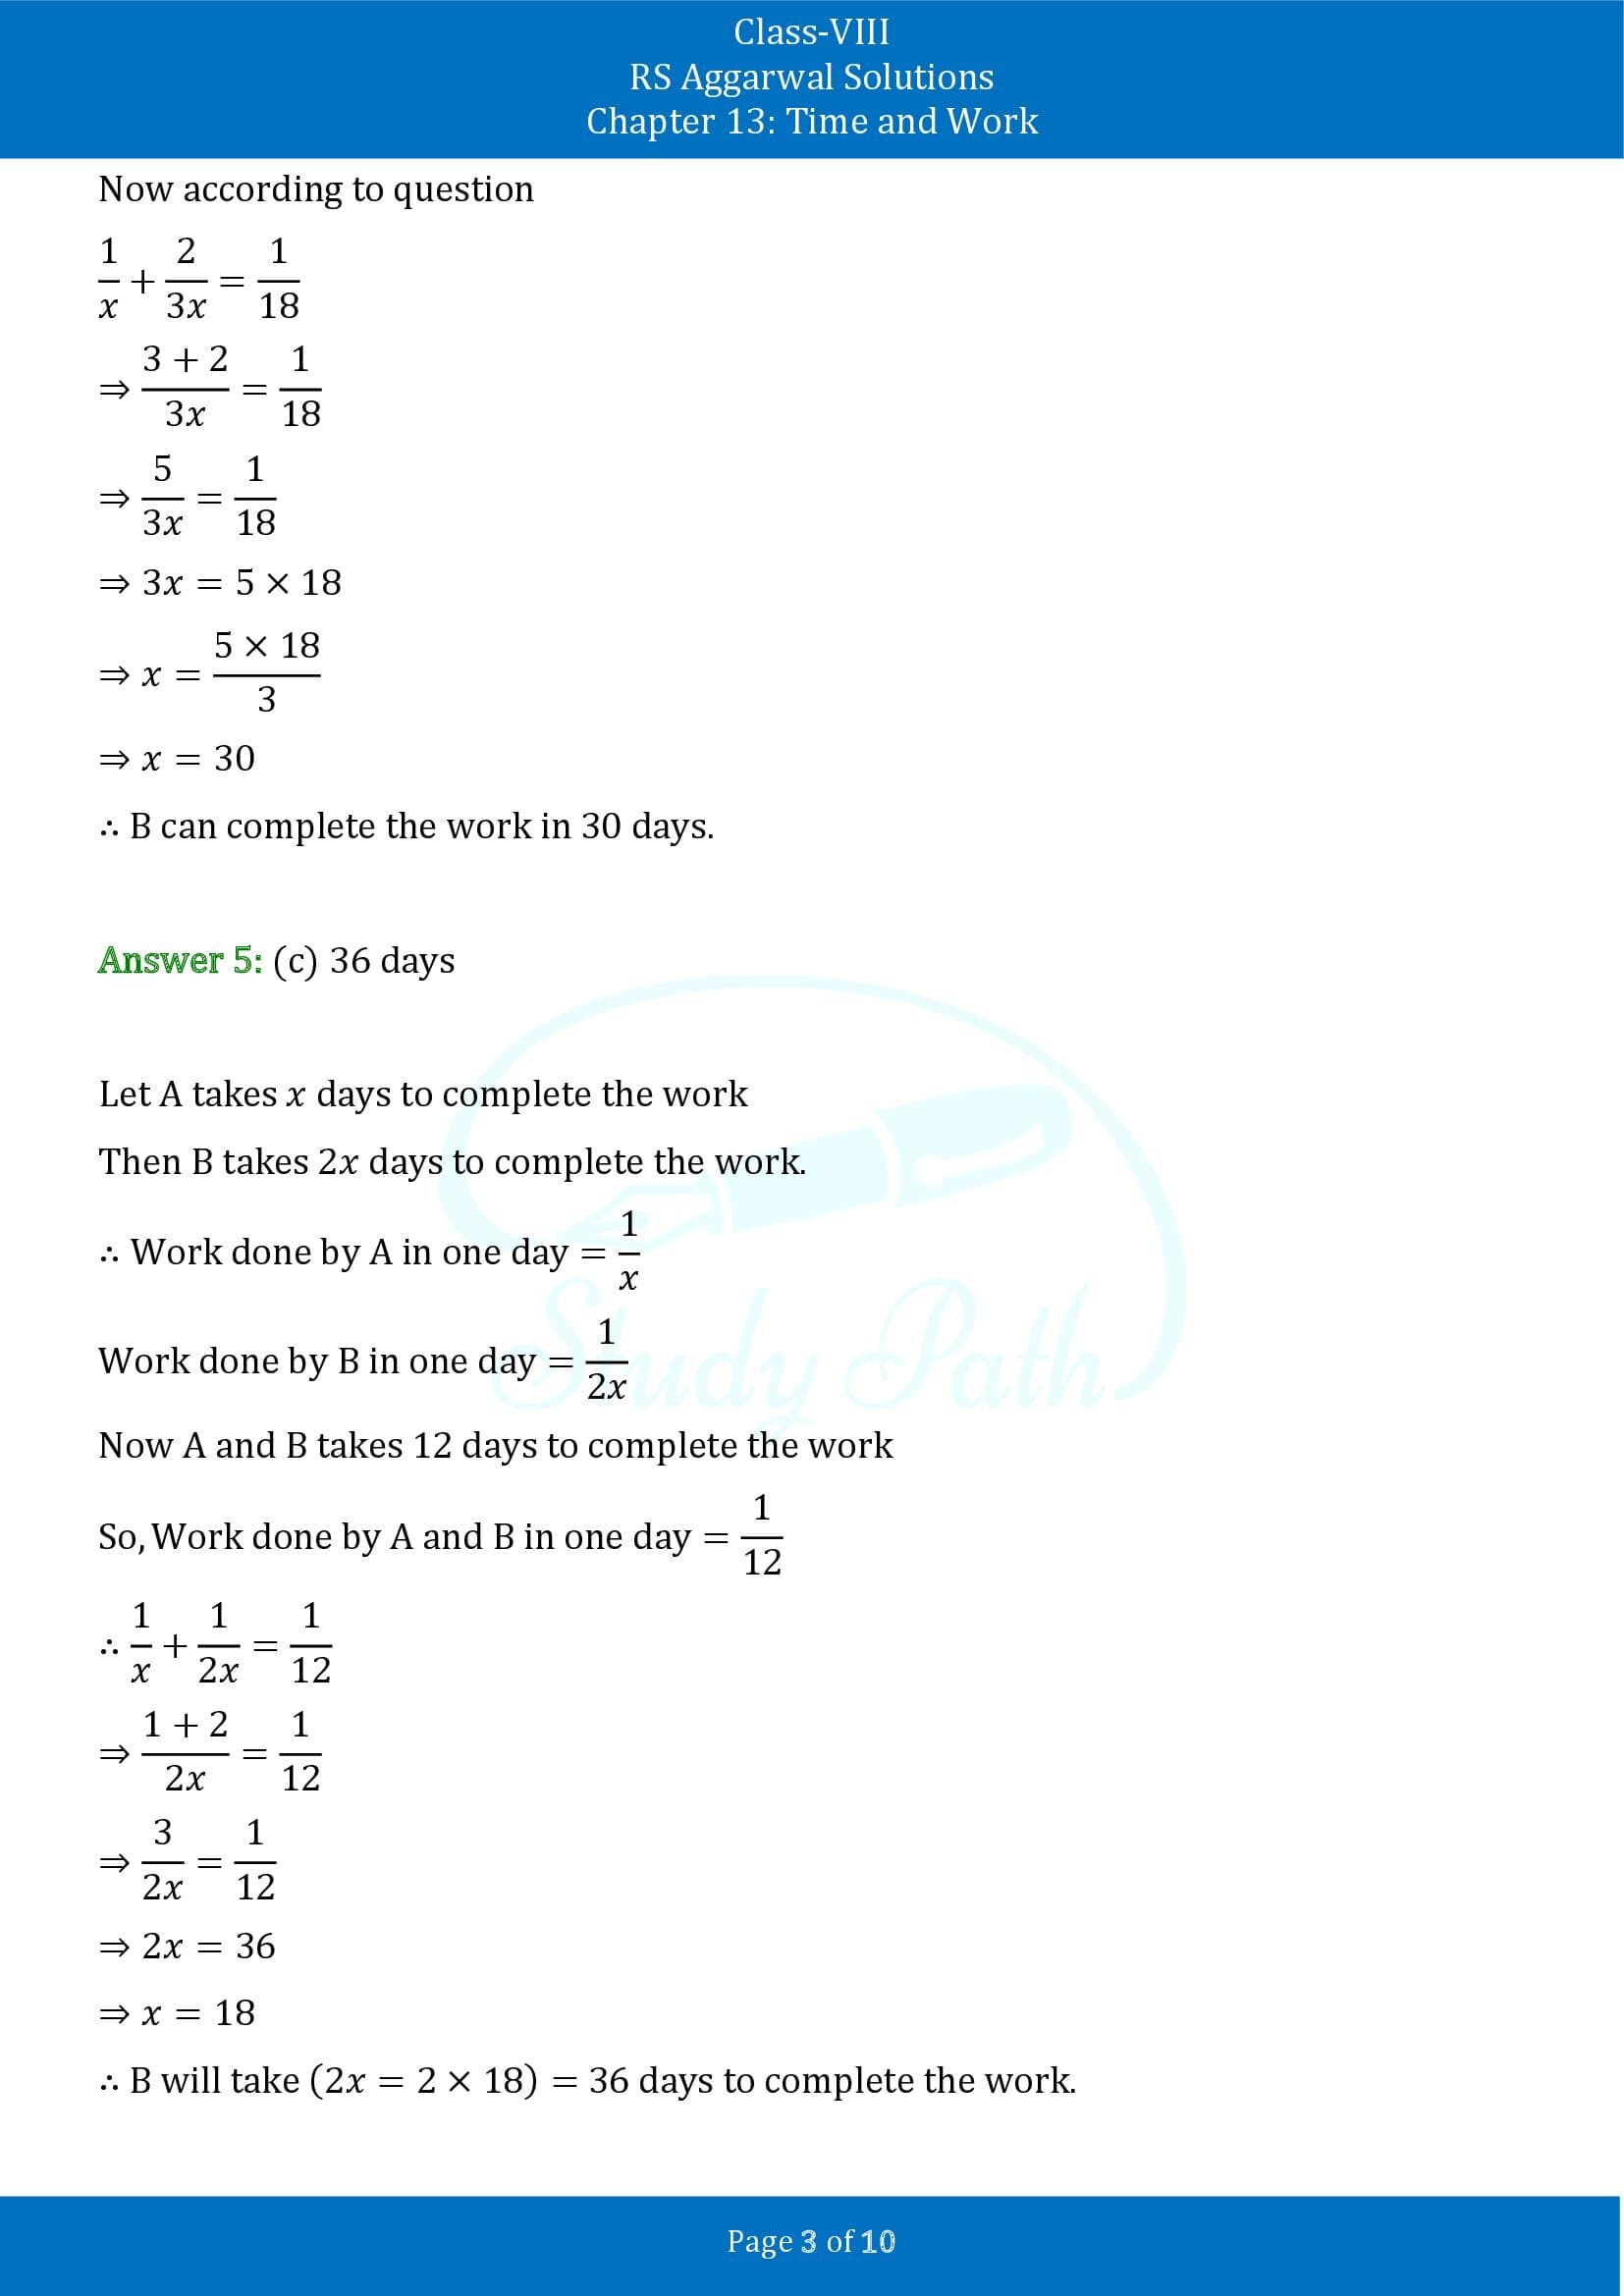 RS Aggarwal Solutions Class 8 Chapter 13 Time and Work Exercise 13B MCQs 00003